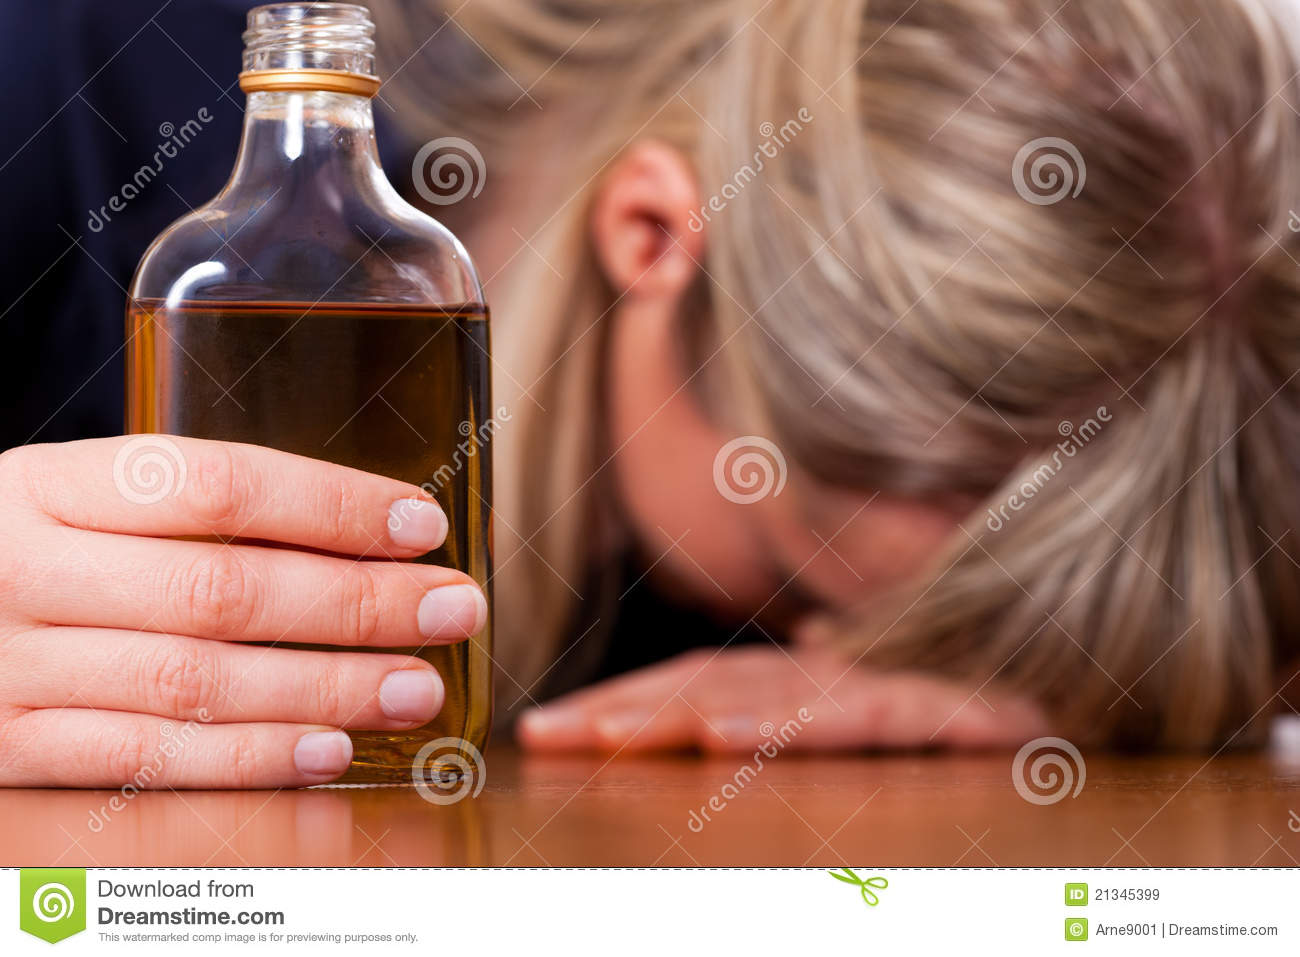 Free Stock Images  Alcohol Abuse   Woman Drinking Too Much Brandy